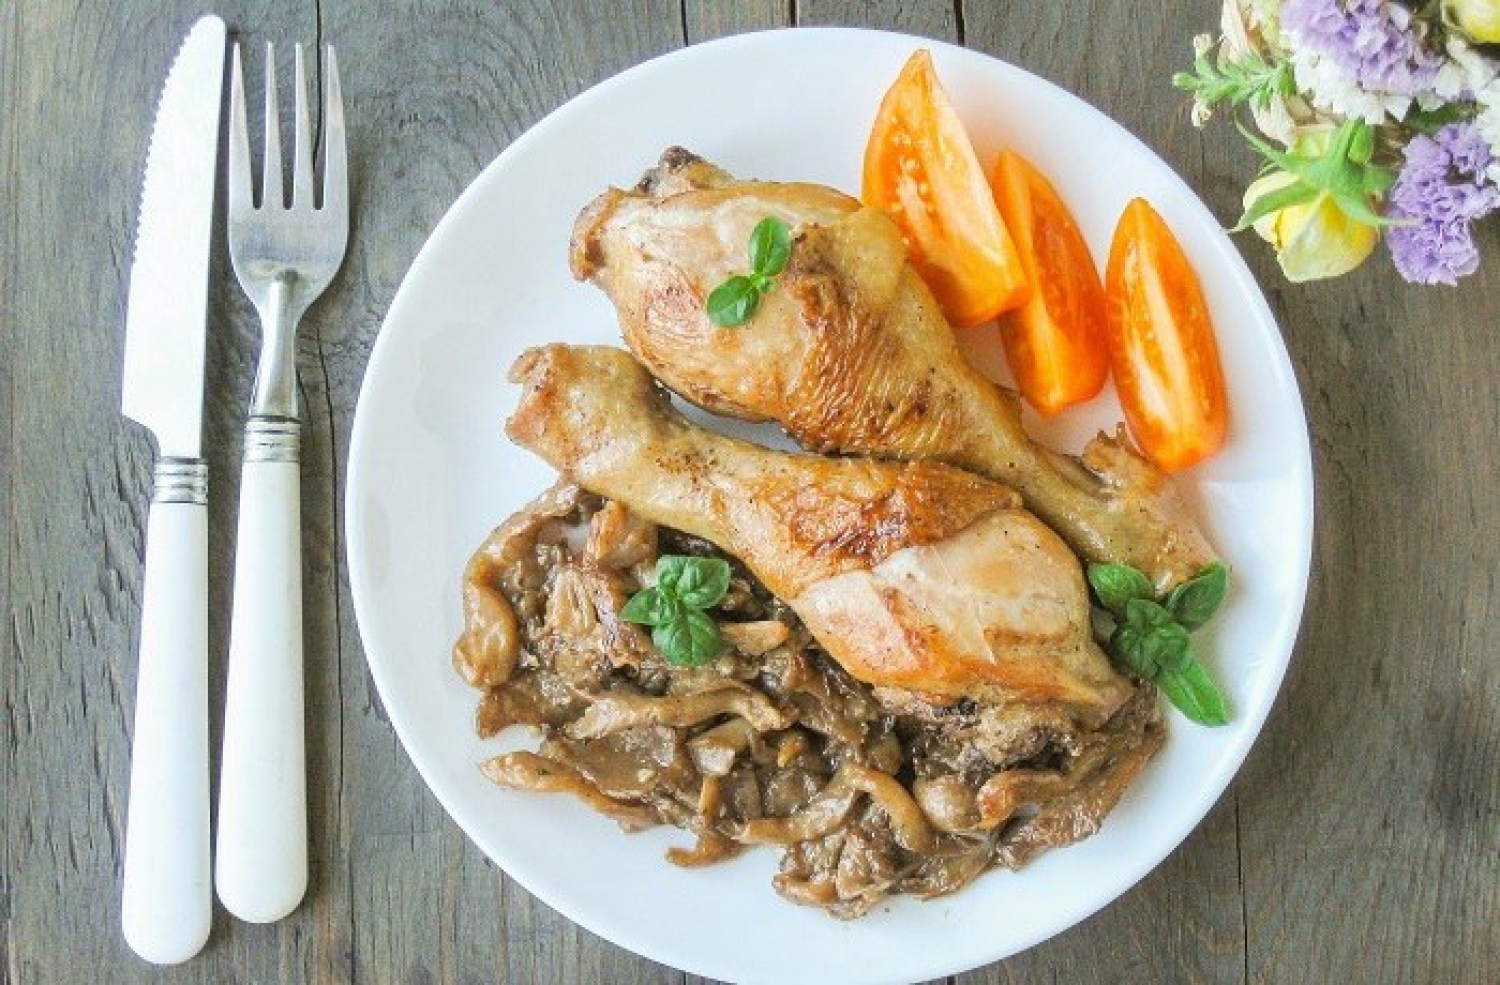 Braised Chicken With Oyster Mushrooms and Beer